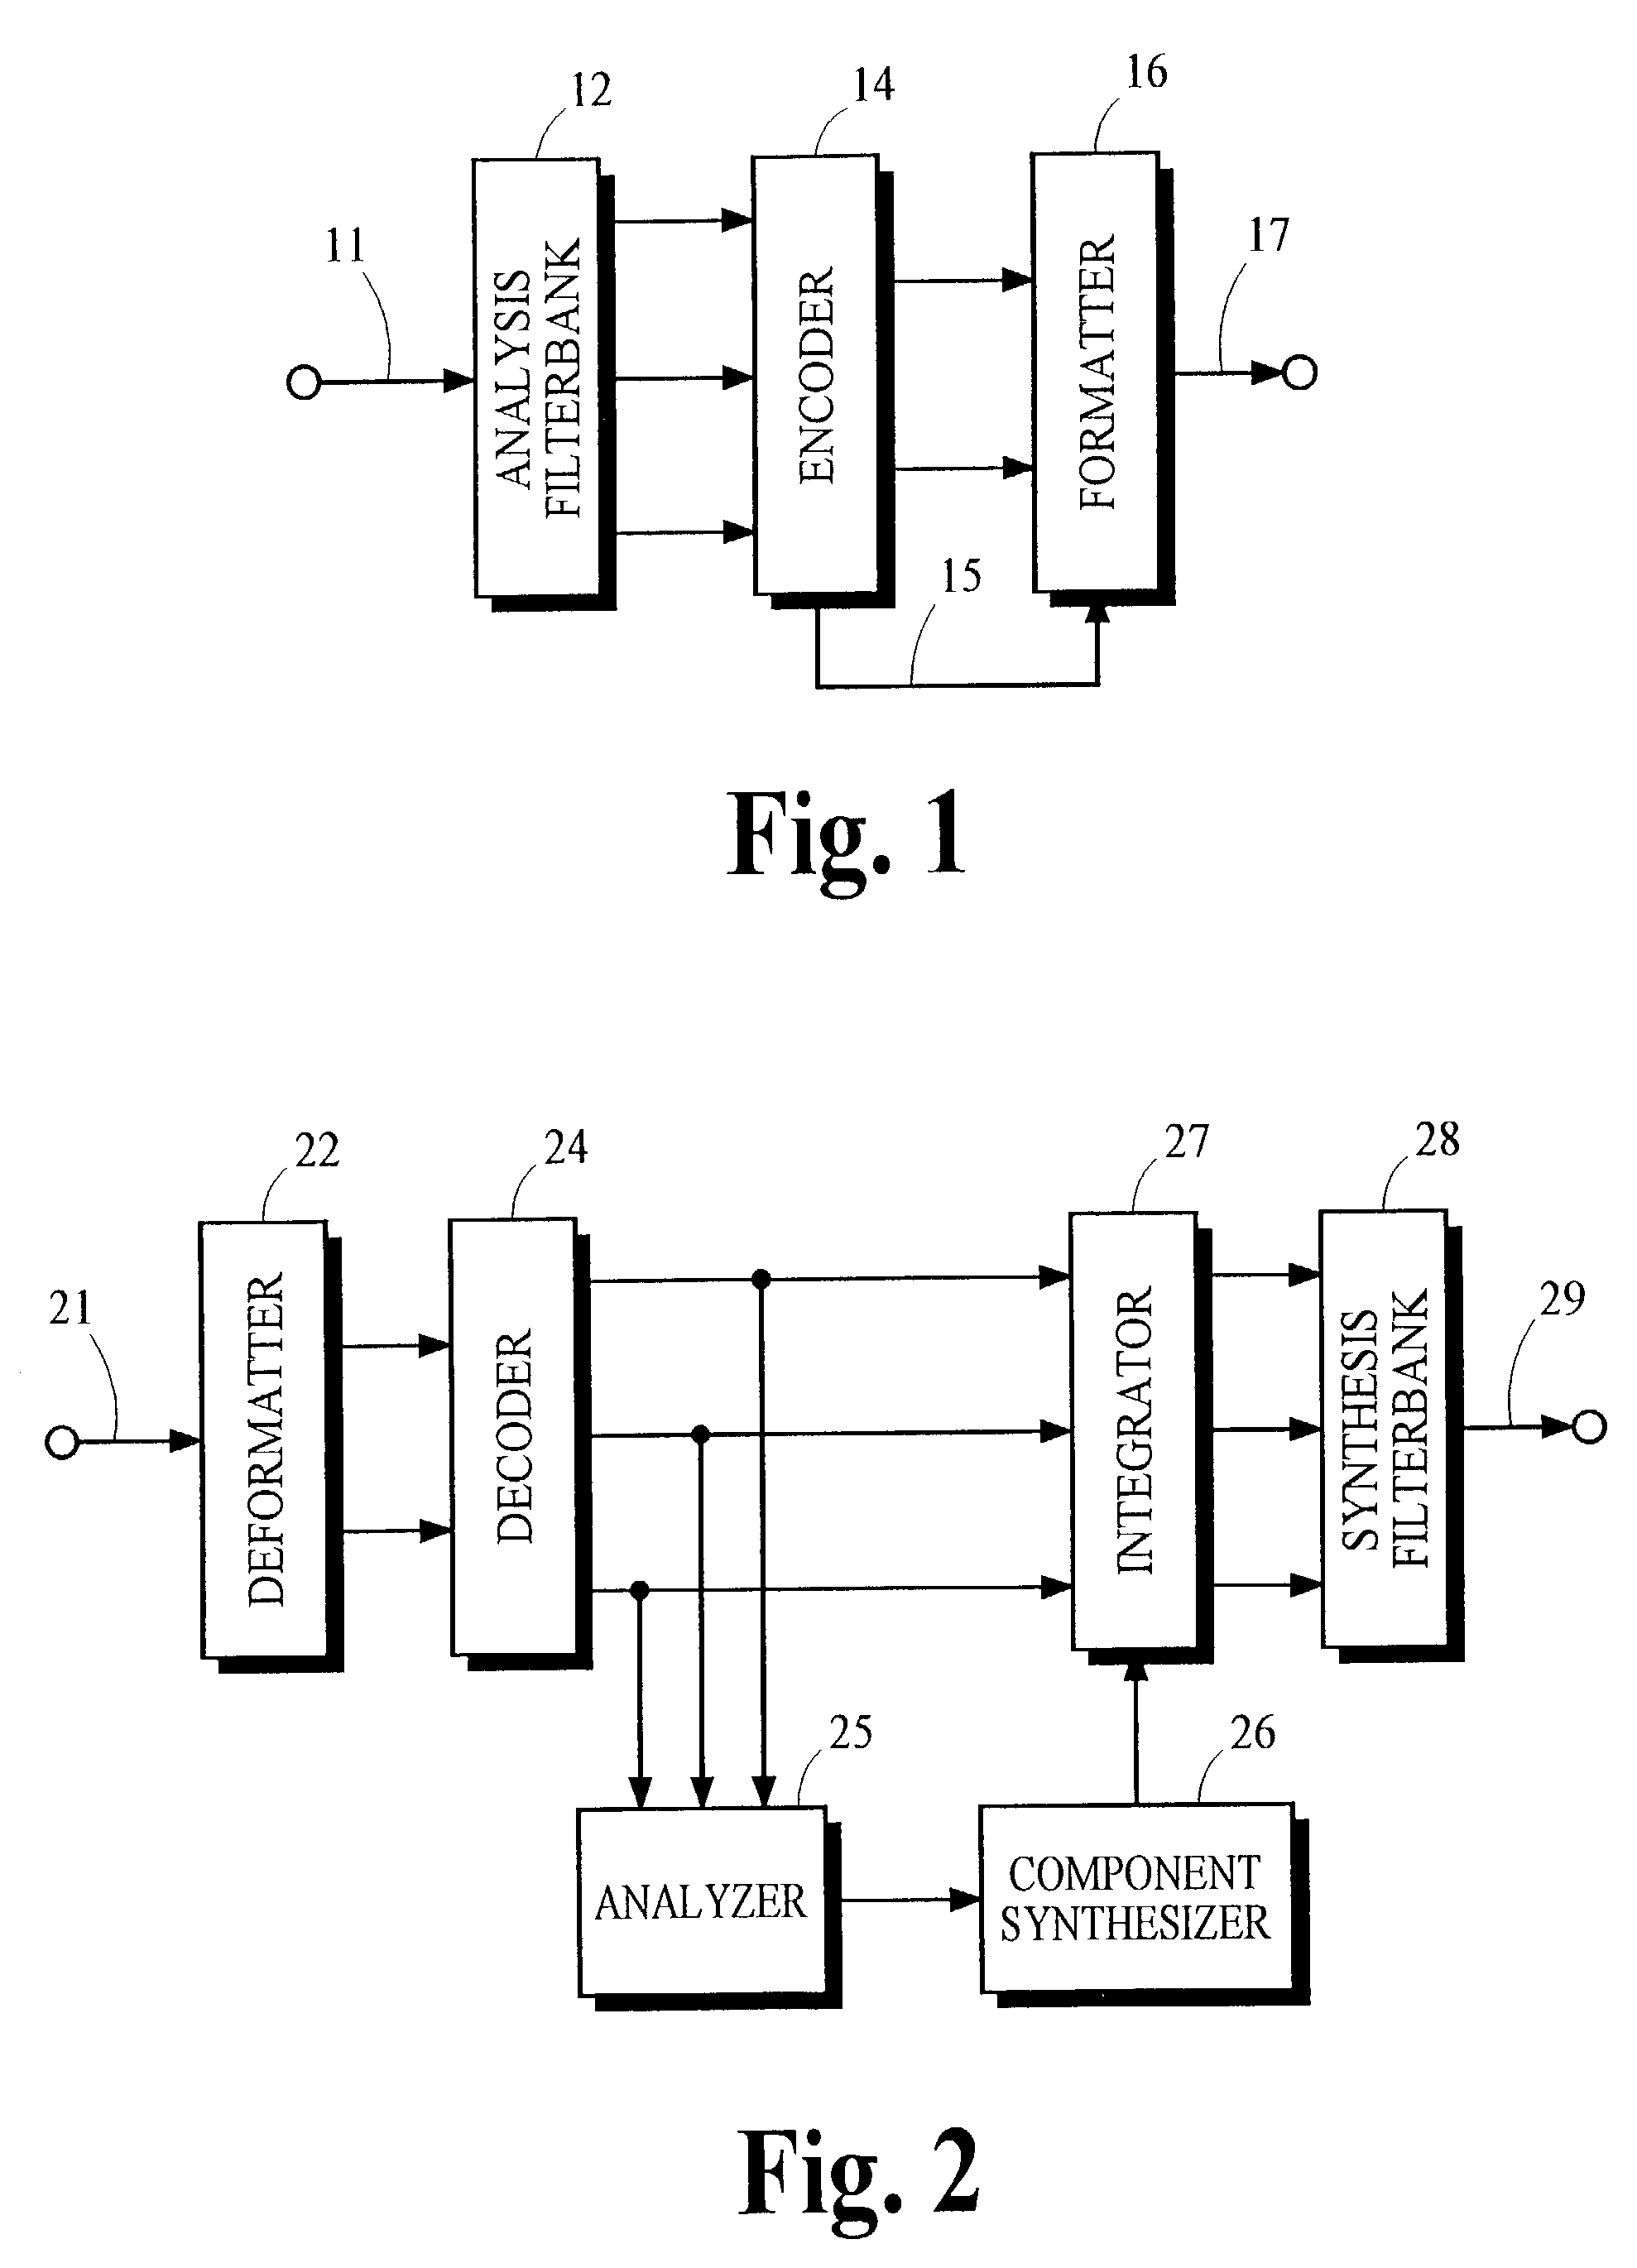 Audio coding system using characteristics of a decoded signal to adapt synthesized spectral components